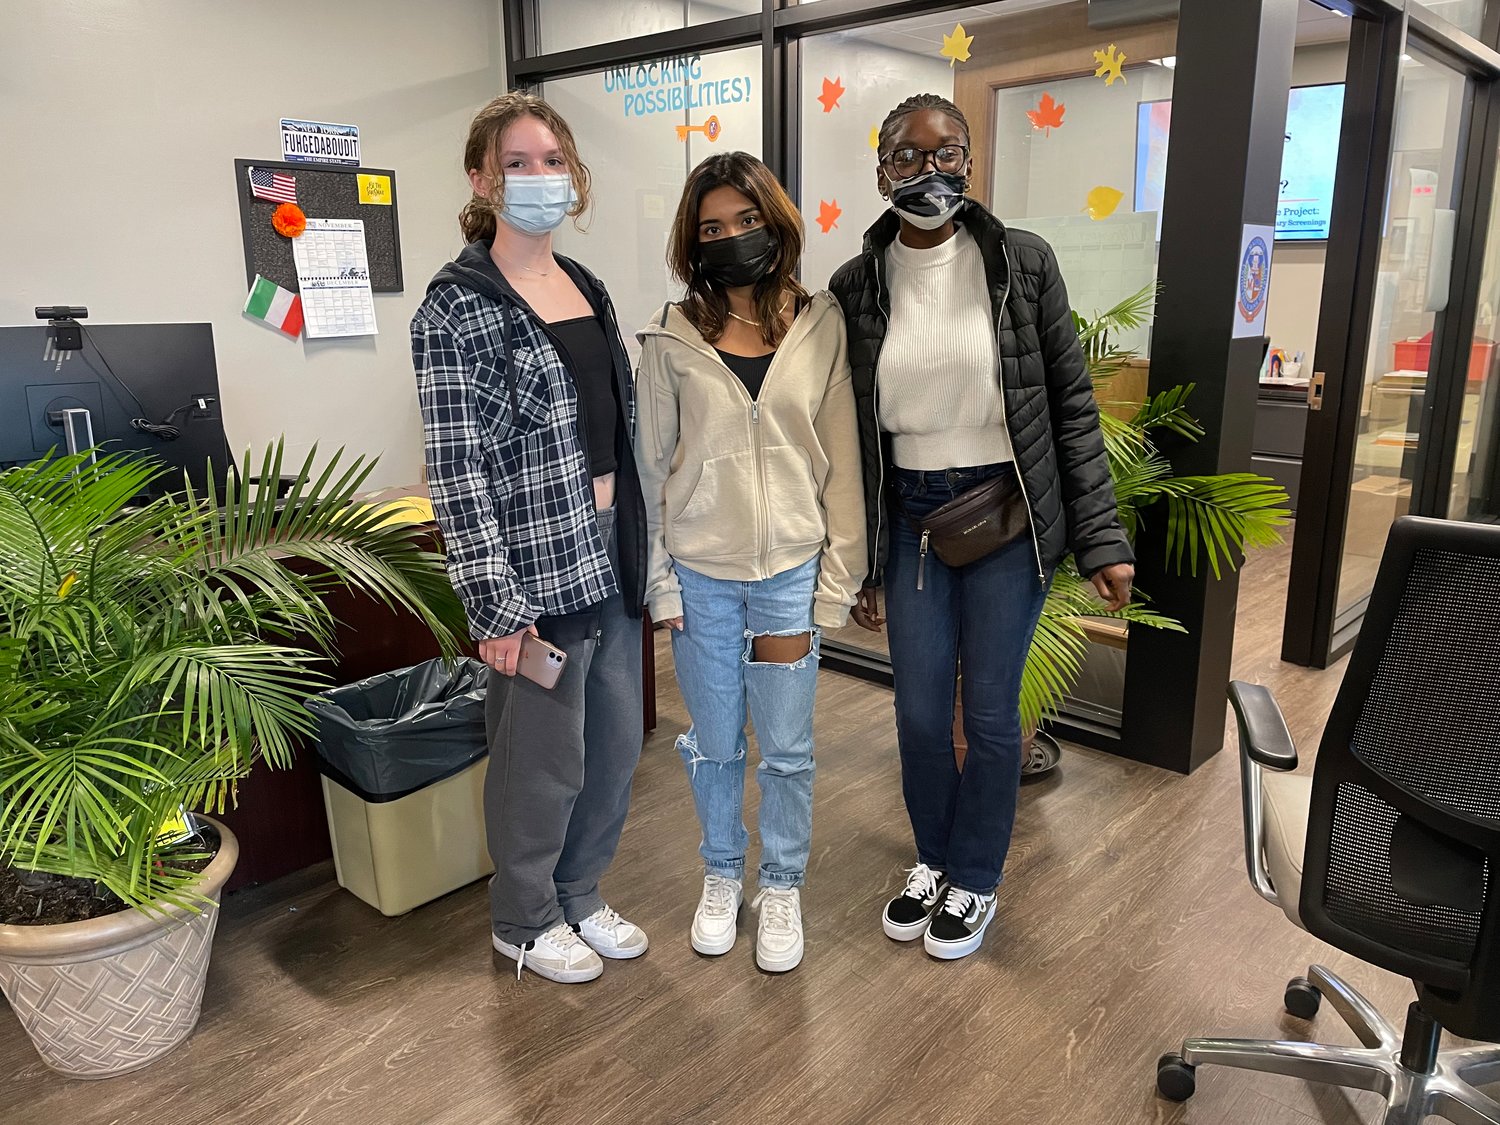 Malverne High School students Olivia Brown, Sabrina Ramhararkh and Kaila Lawrence took part in the Linder Place Project, a student-run campaign to have the street name changed.